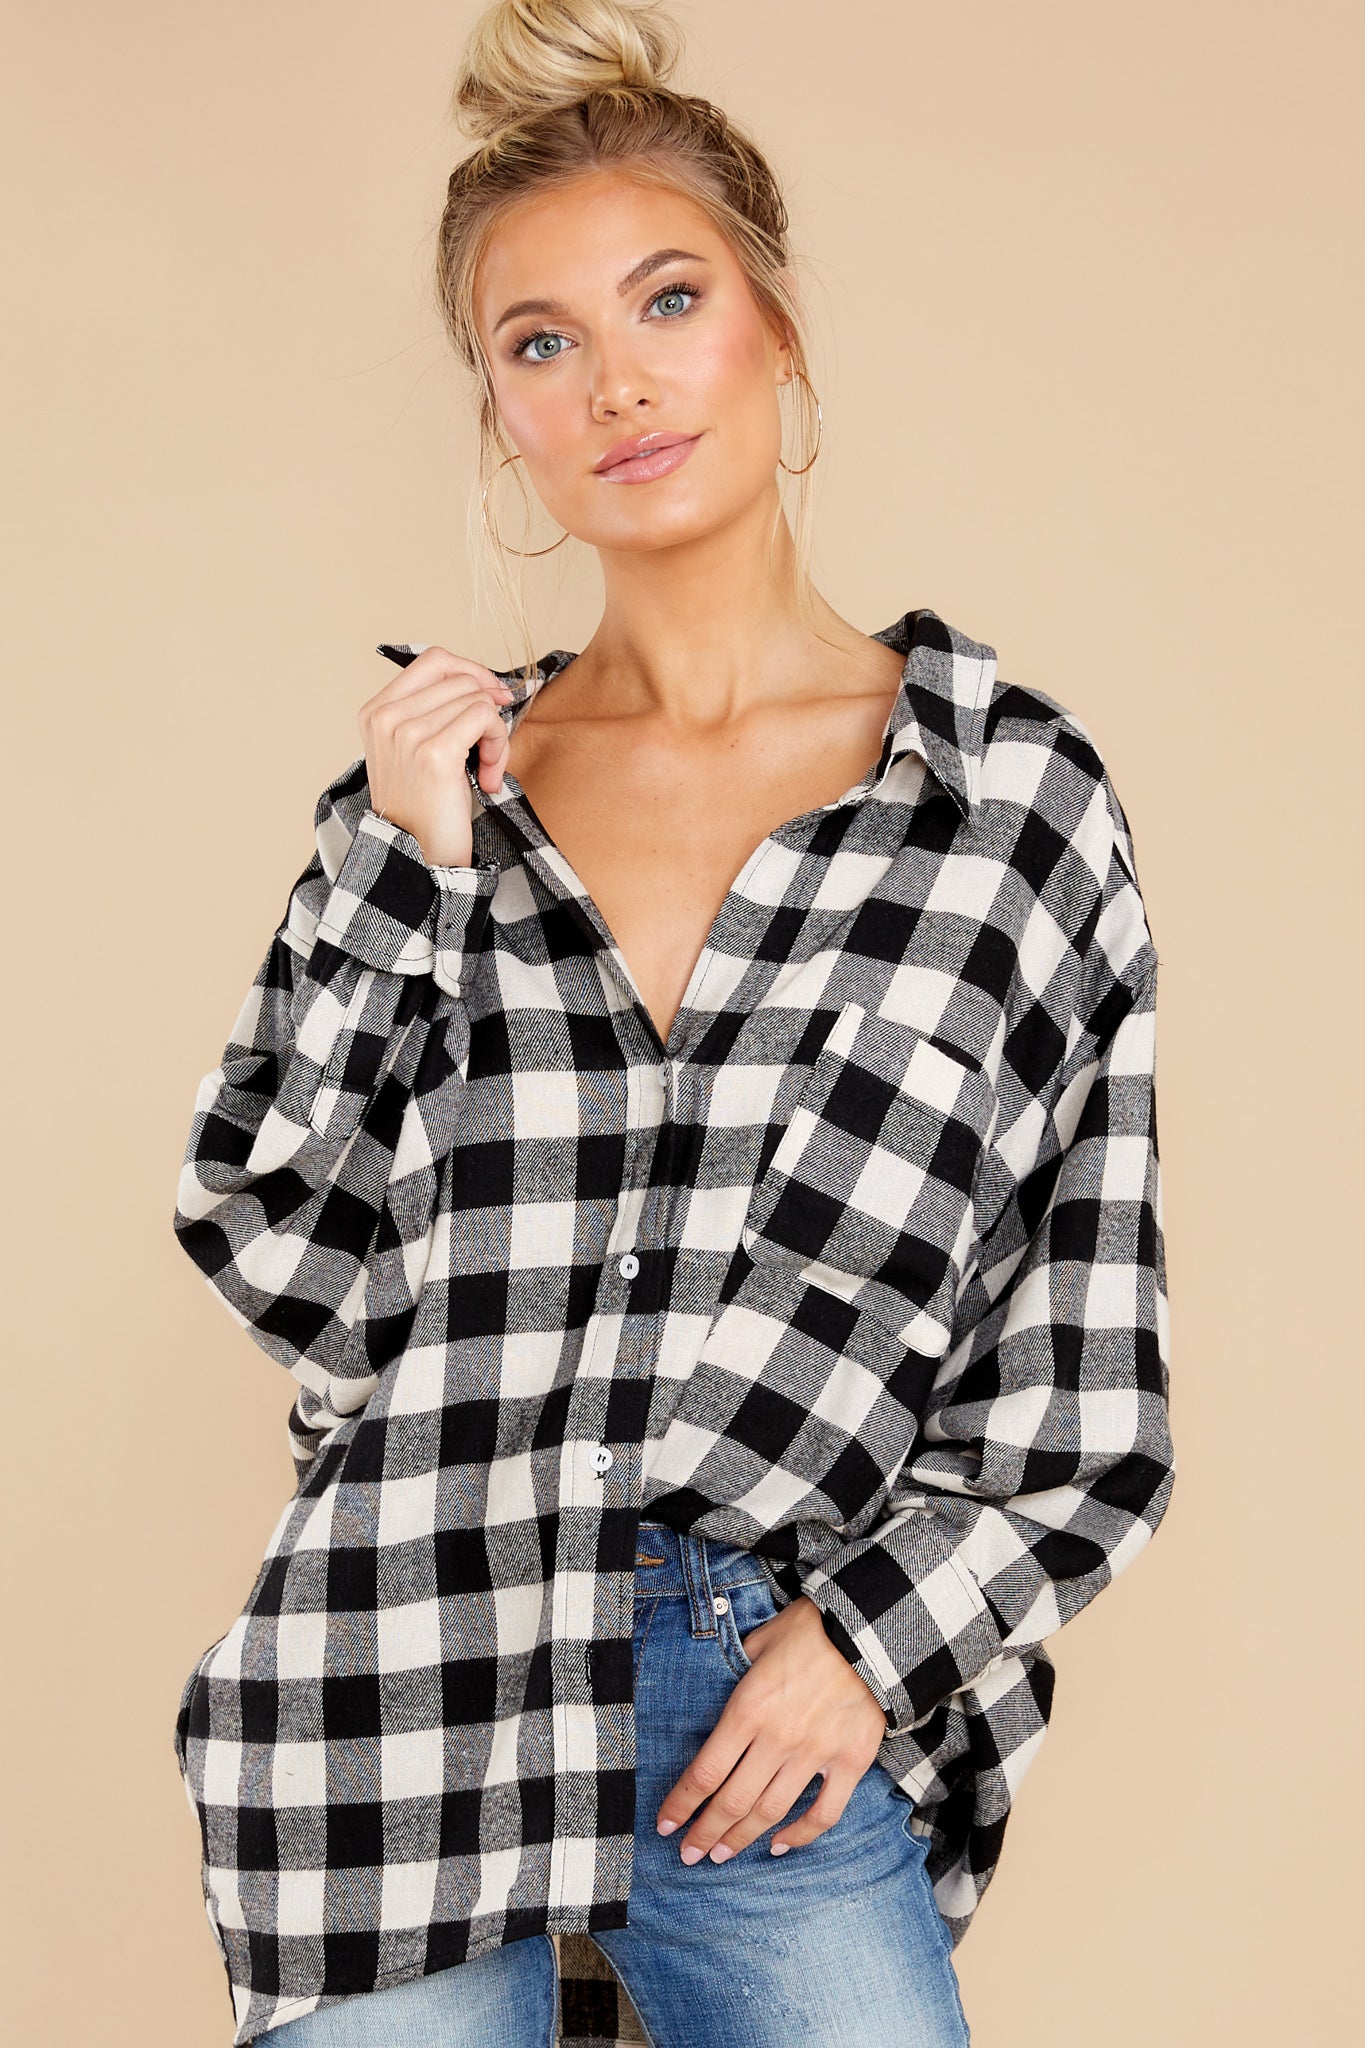 7 Chasing Cities Black And White Plaid Top at reddress.com